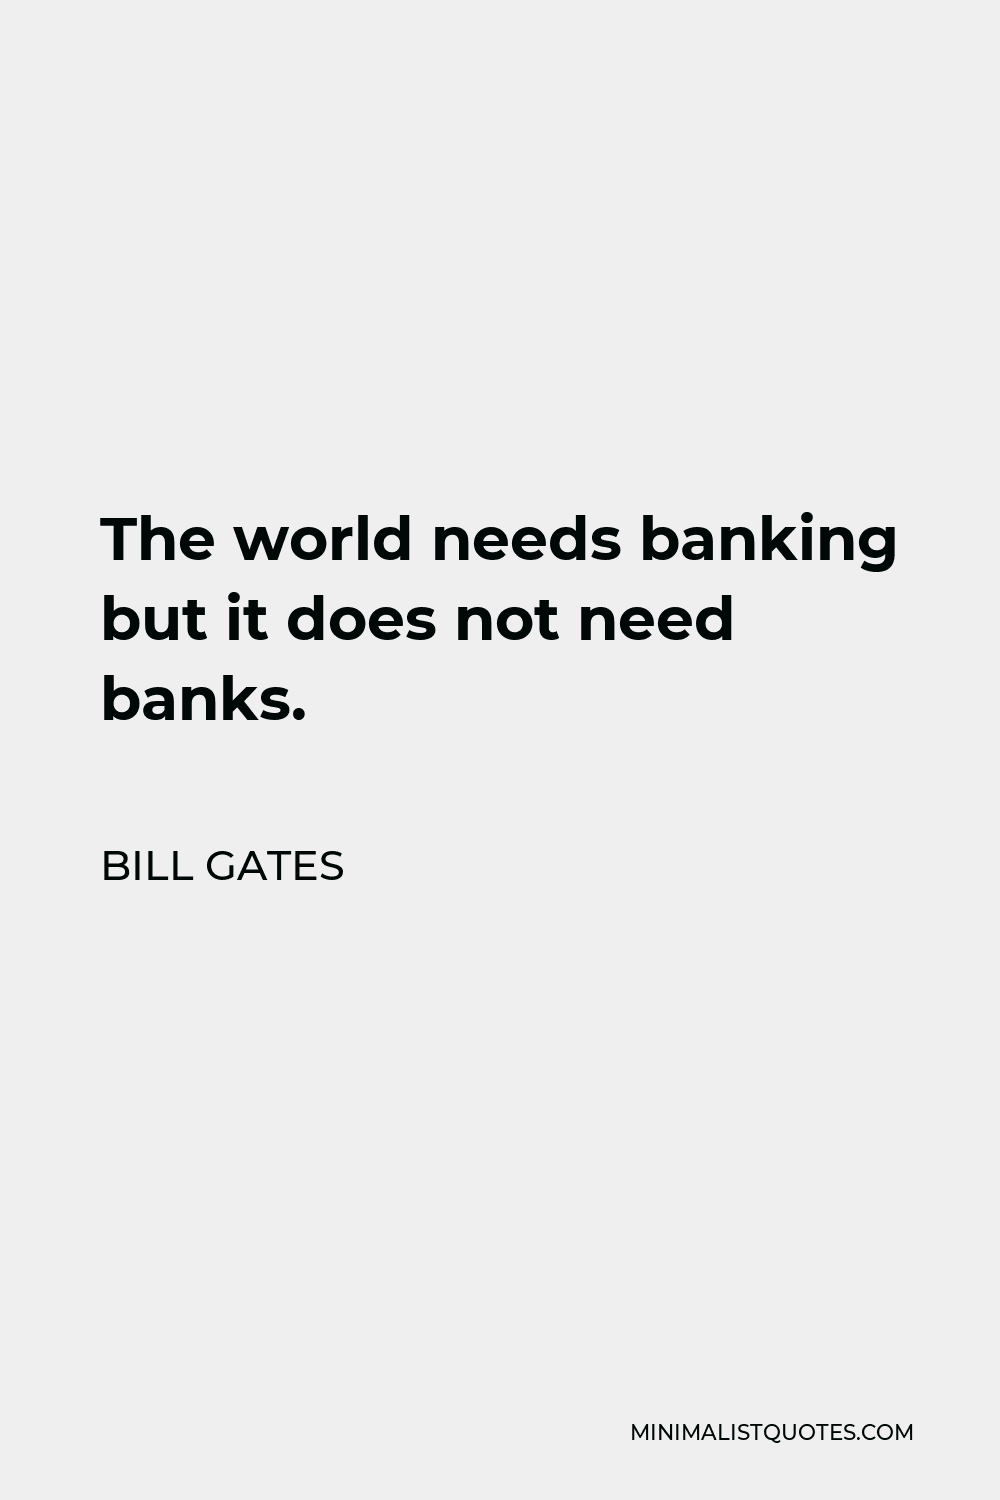 Bill Gates Quote - The world needs banking but it does not need banks.